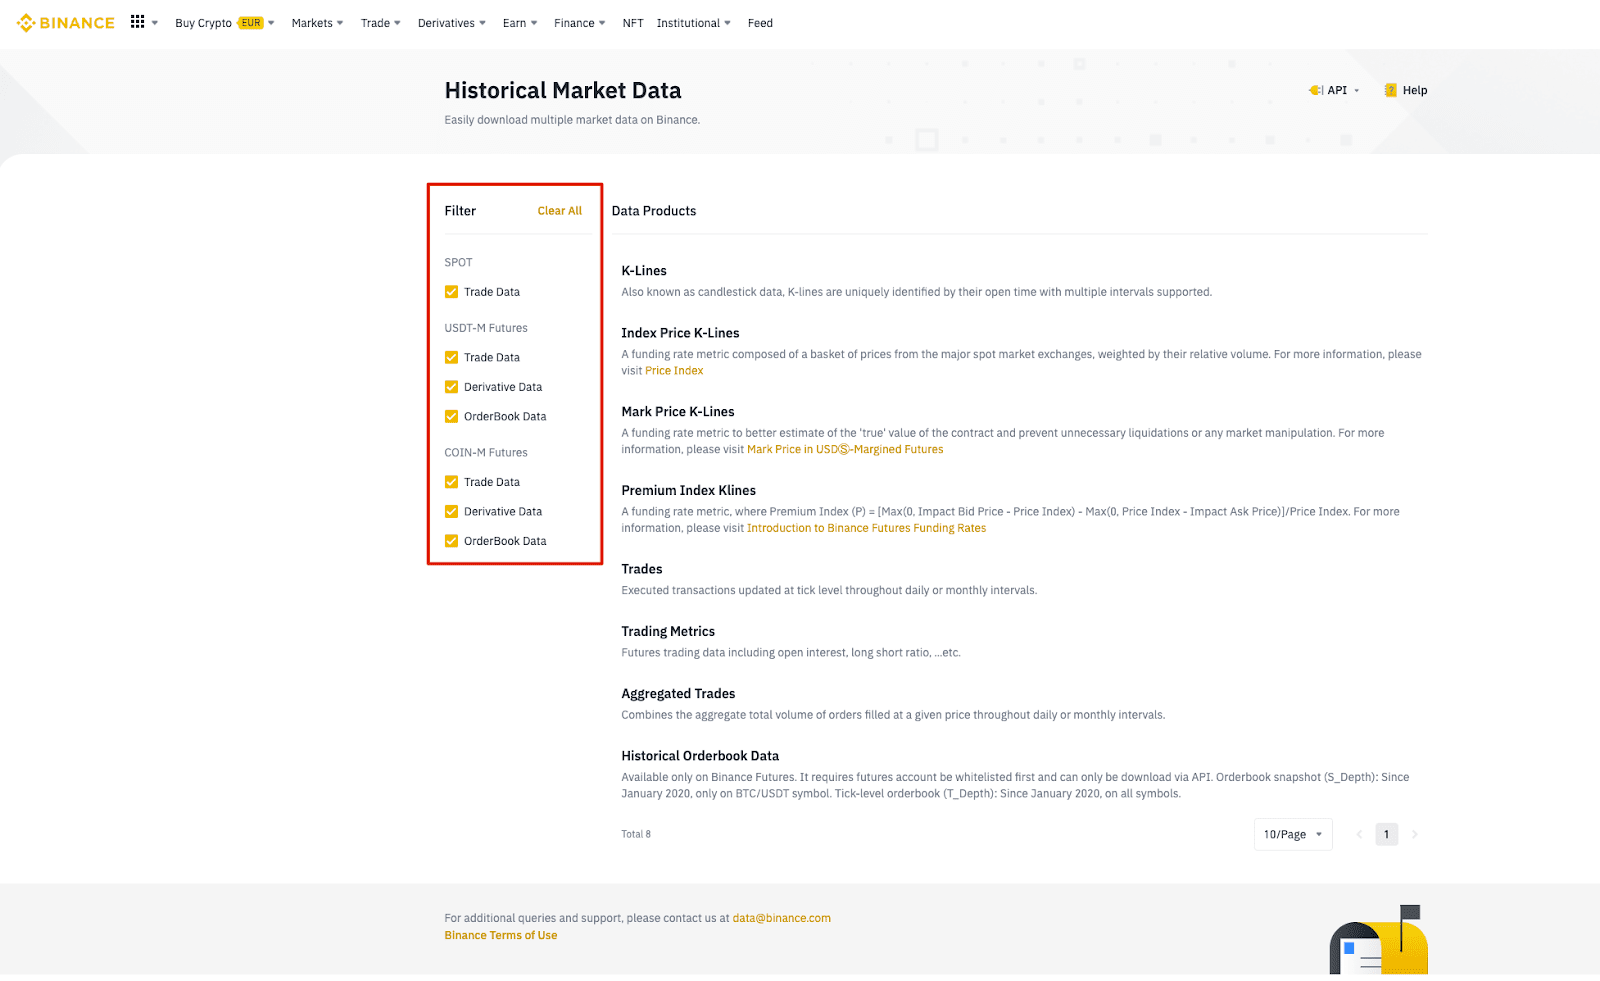 Using Binance API to Get The User’s Trading History